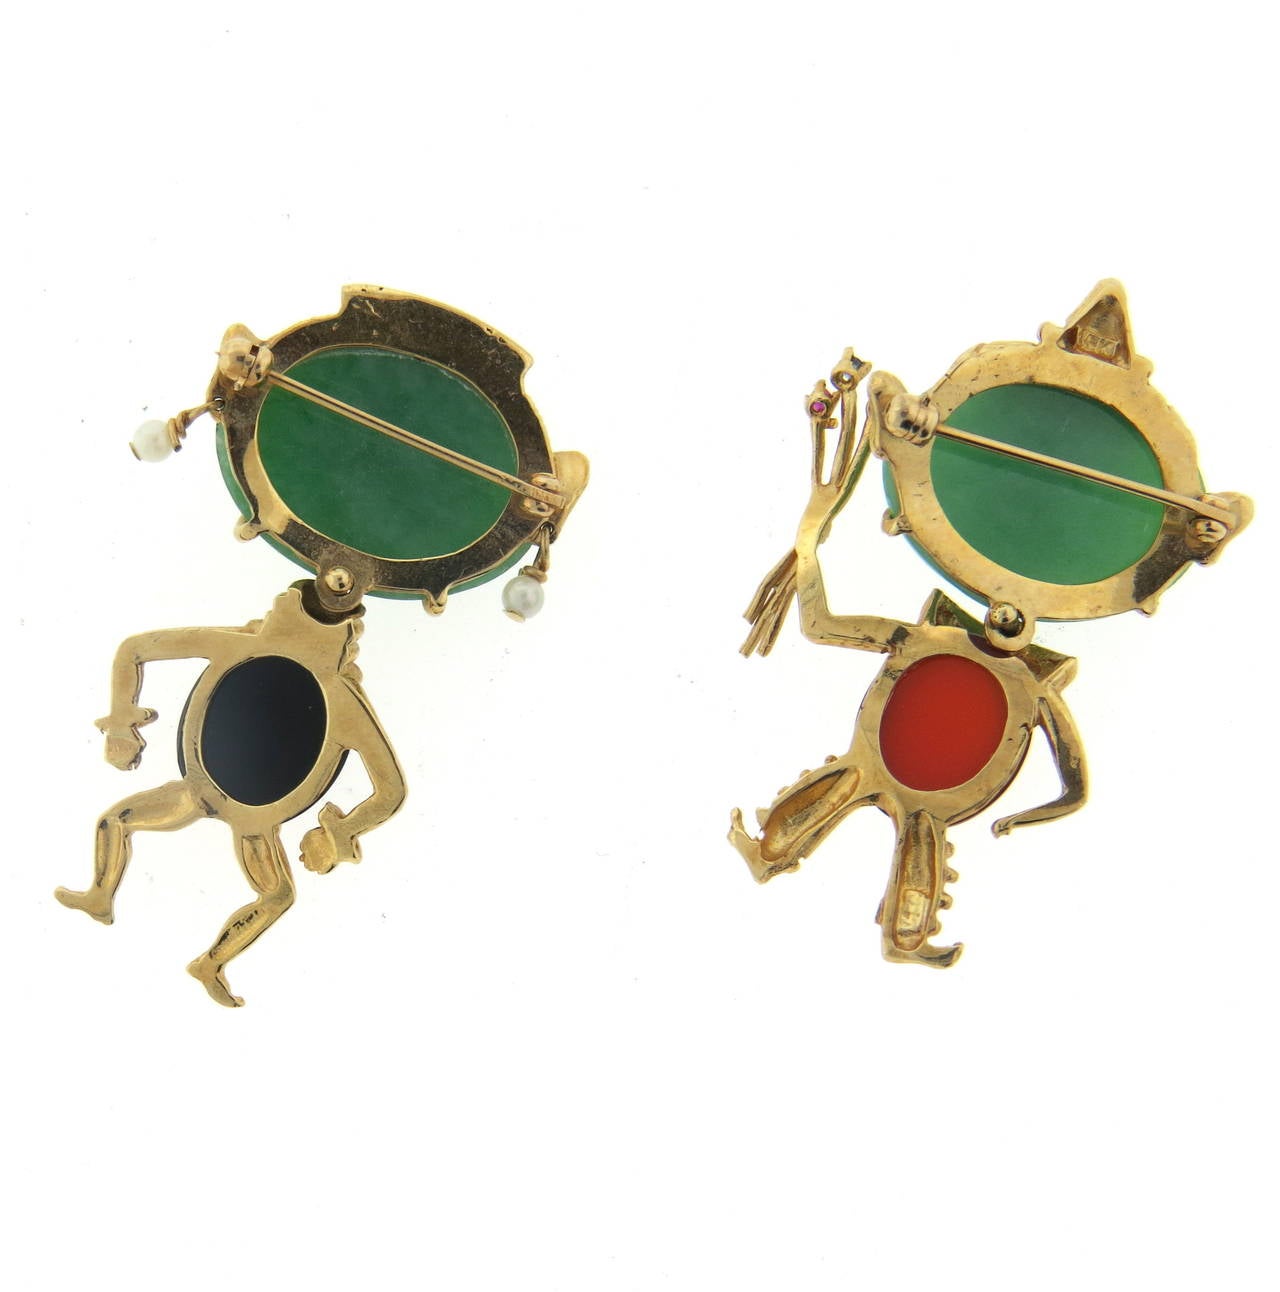 A pair of 14k yellow gold brooches set with multi colored jade and pearls.  Brooches measure 43mm x 23mm and 43mm x 32mm respectively.  One of the figures is depicted holding flowers containing rubies and a sapphire. The total weight of the set is